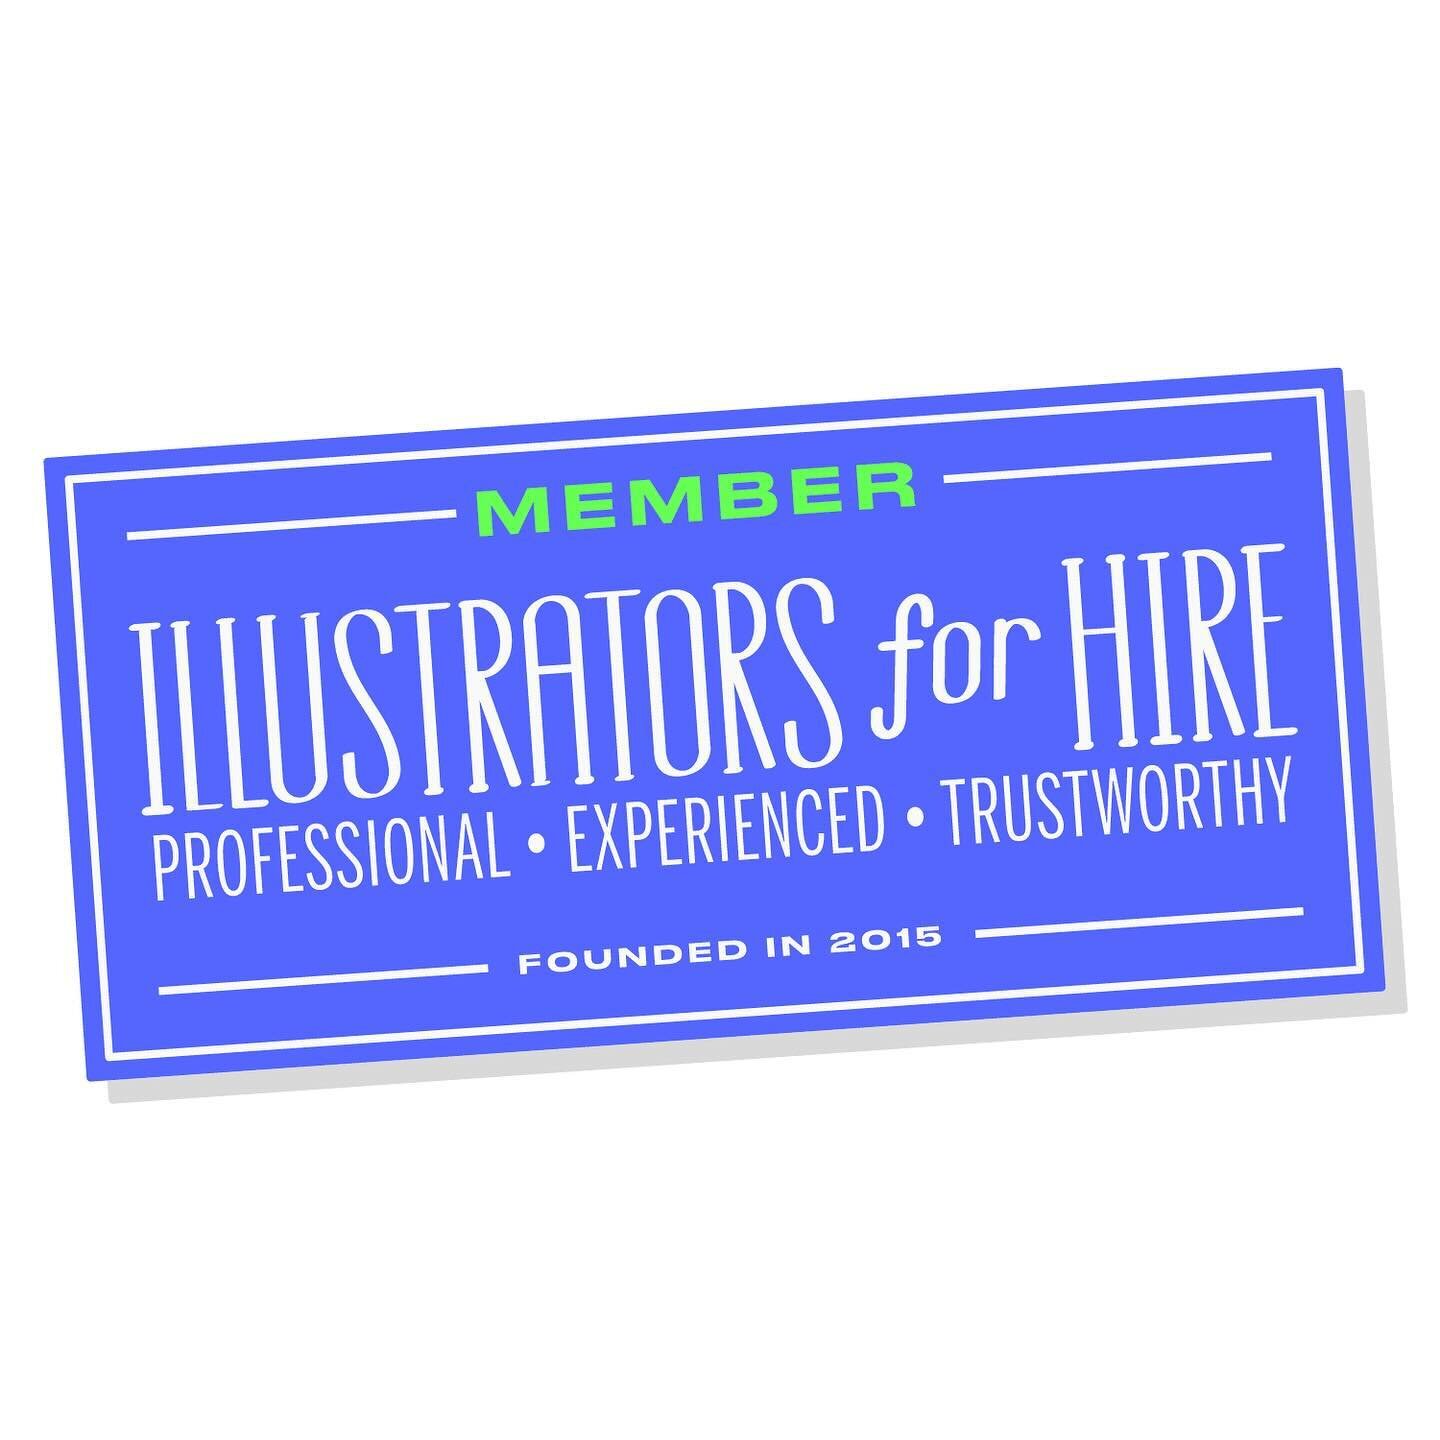 As you might know, I&rsquo;m a member of Illustrators For Hire: @illustratorsforhire, a curated group of professional freelance illustrators. They recently launched a new website that focuses on illustration niches. The specific type of illustrations